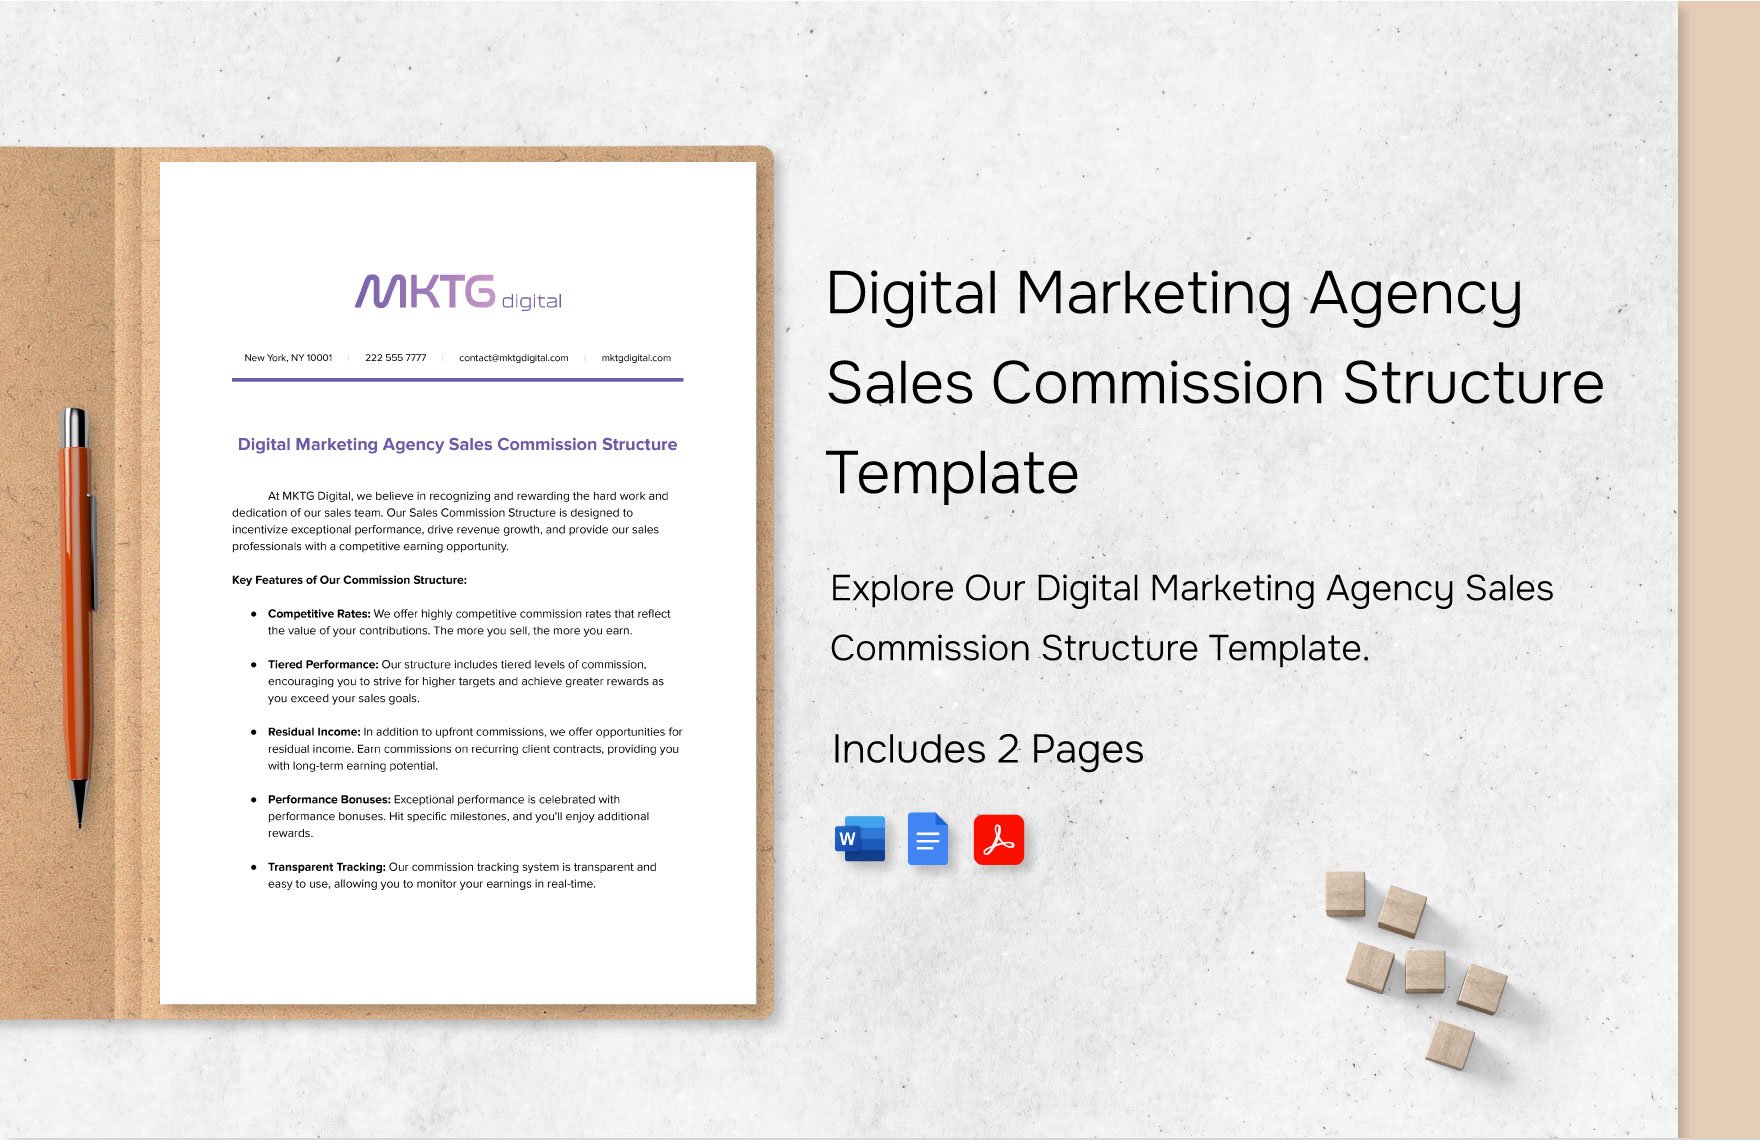 Digital Marketing Agency Sales Commission Structure Template